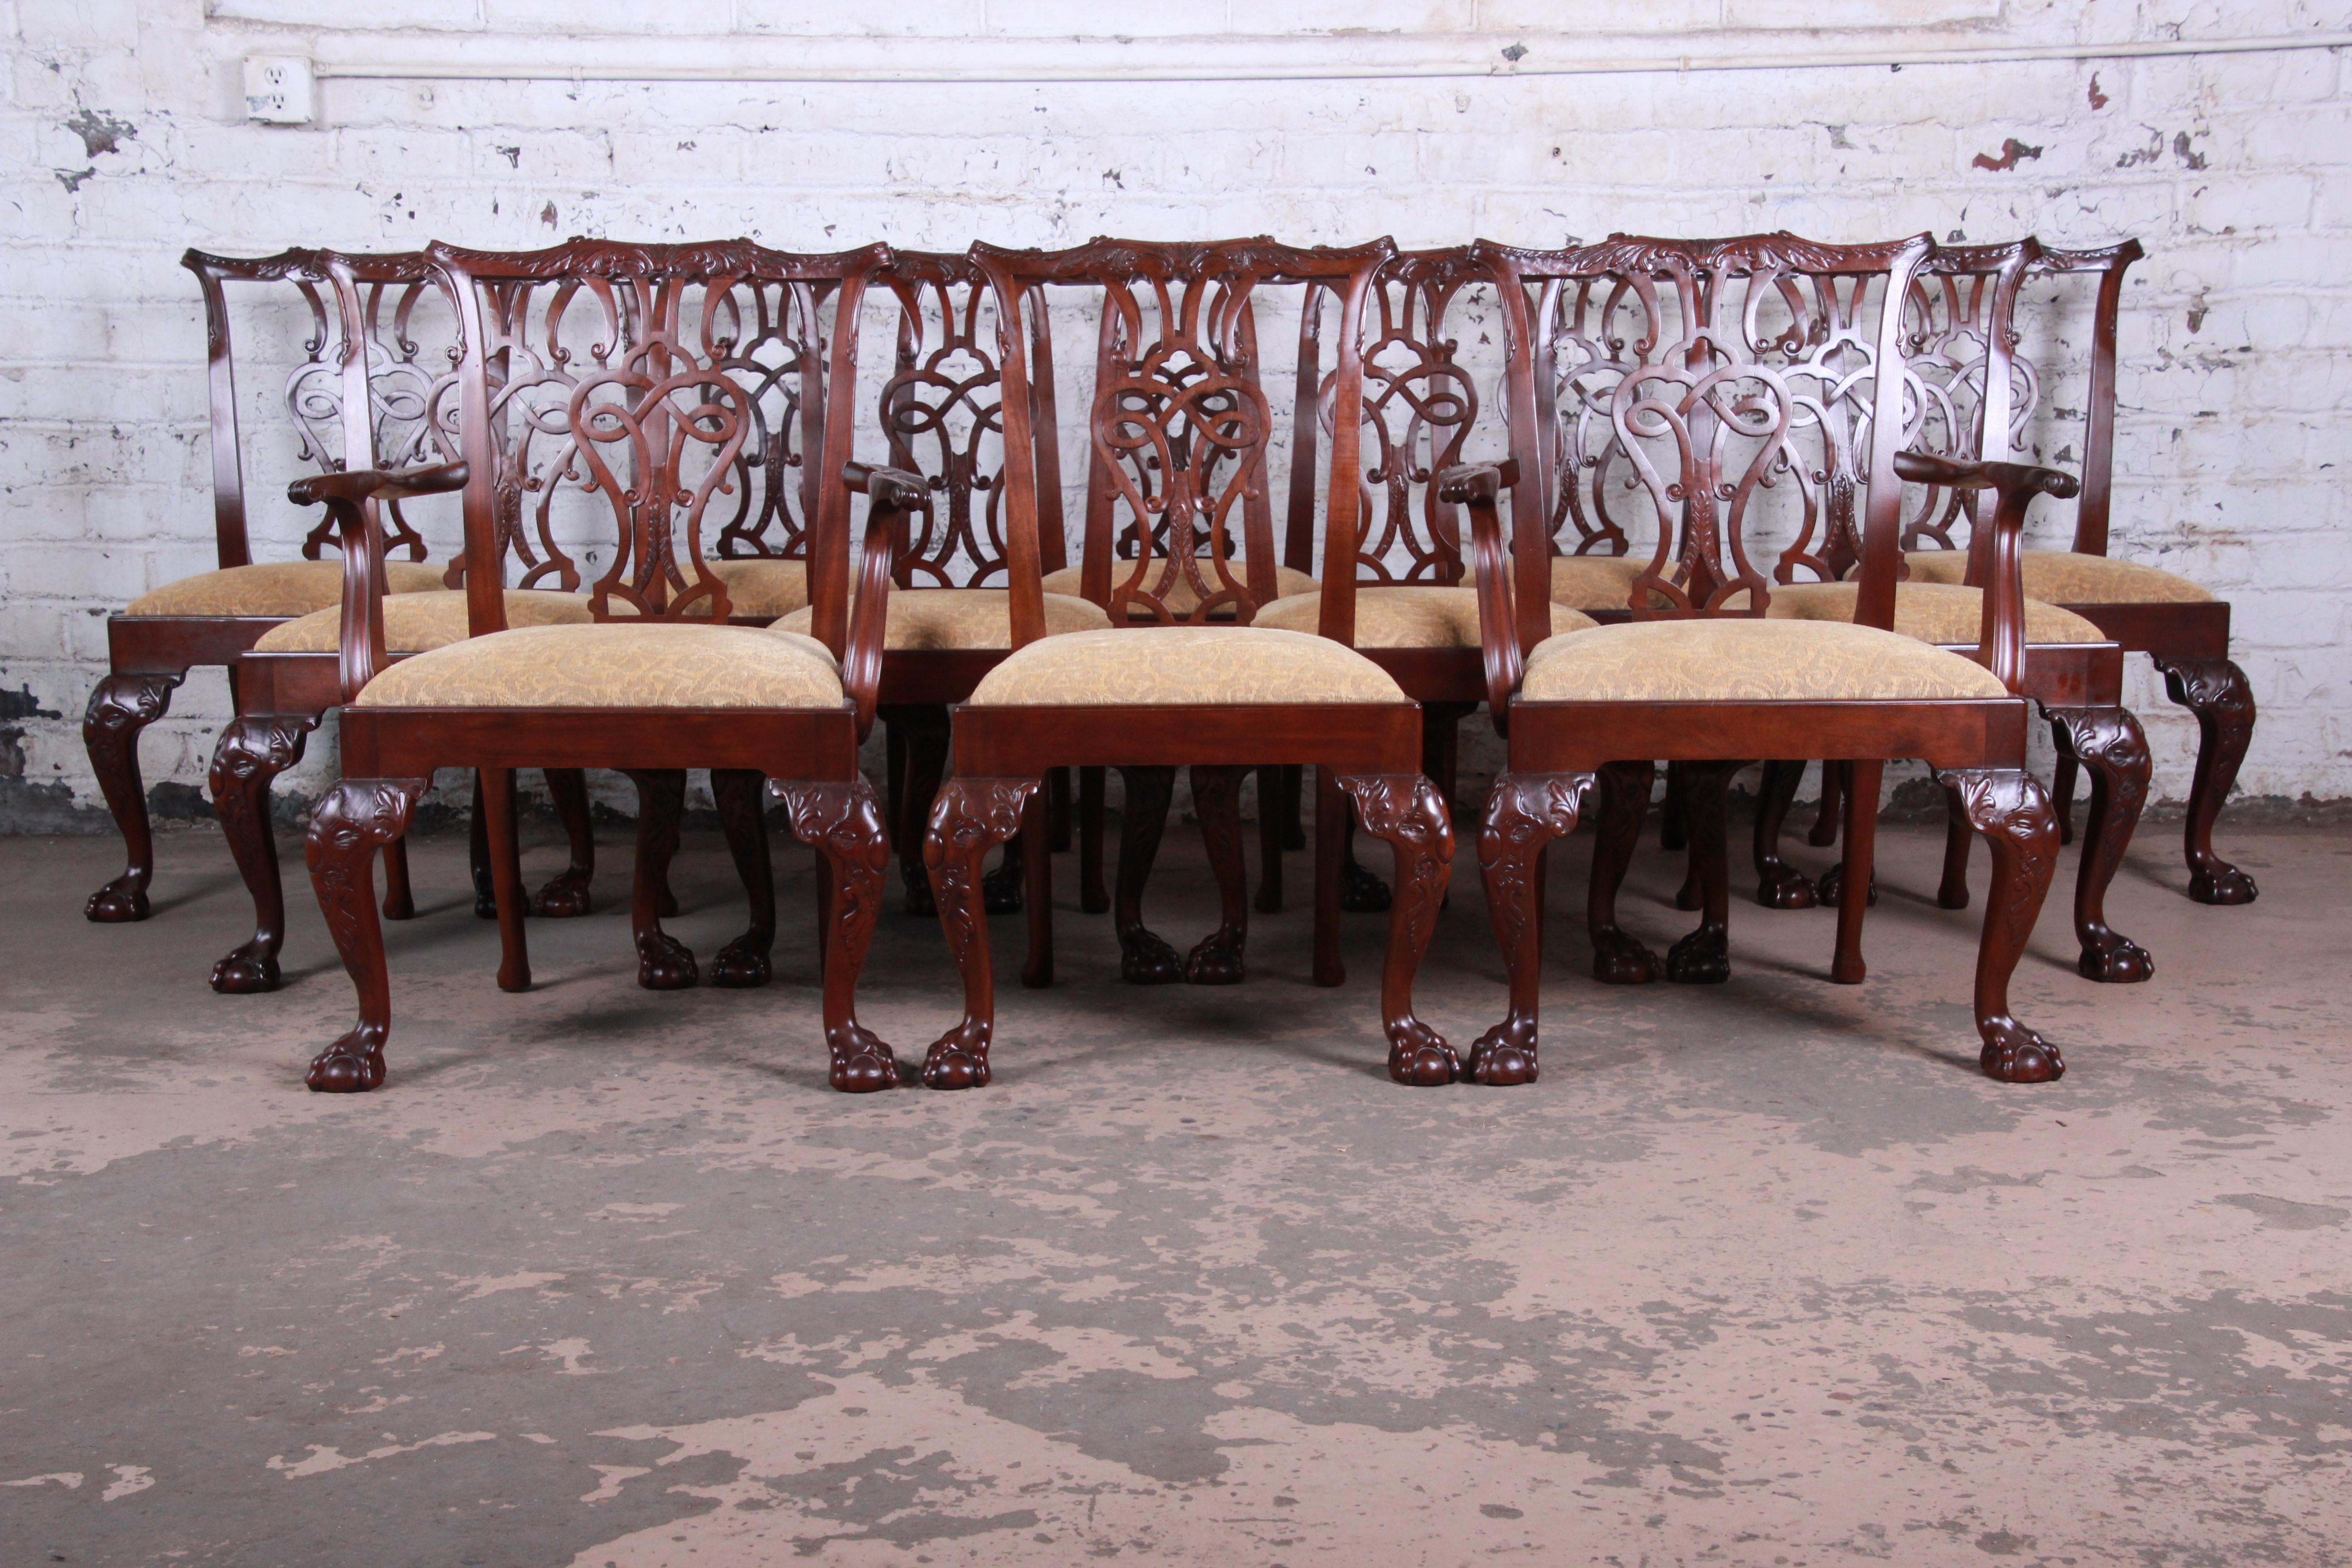 A rare and exceptional set of twelve fine Chippendale carved mahogany dining chairs from the exclusive Stately Homes collection by Baker Furniture. The set includes two open armchairs and ten side chairs. The chairs feature shaped back supports with